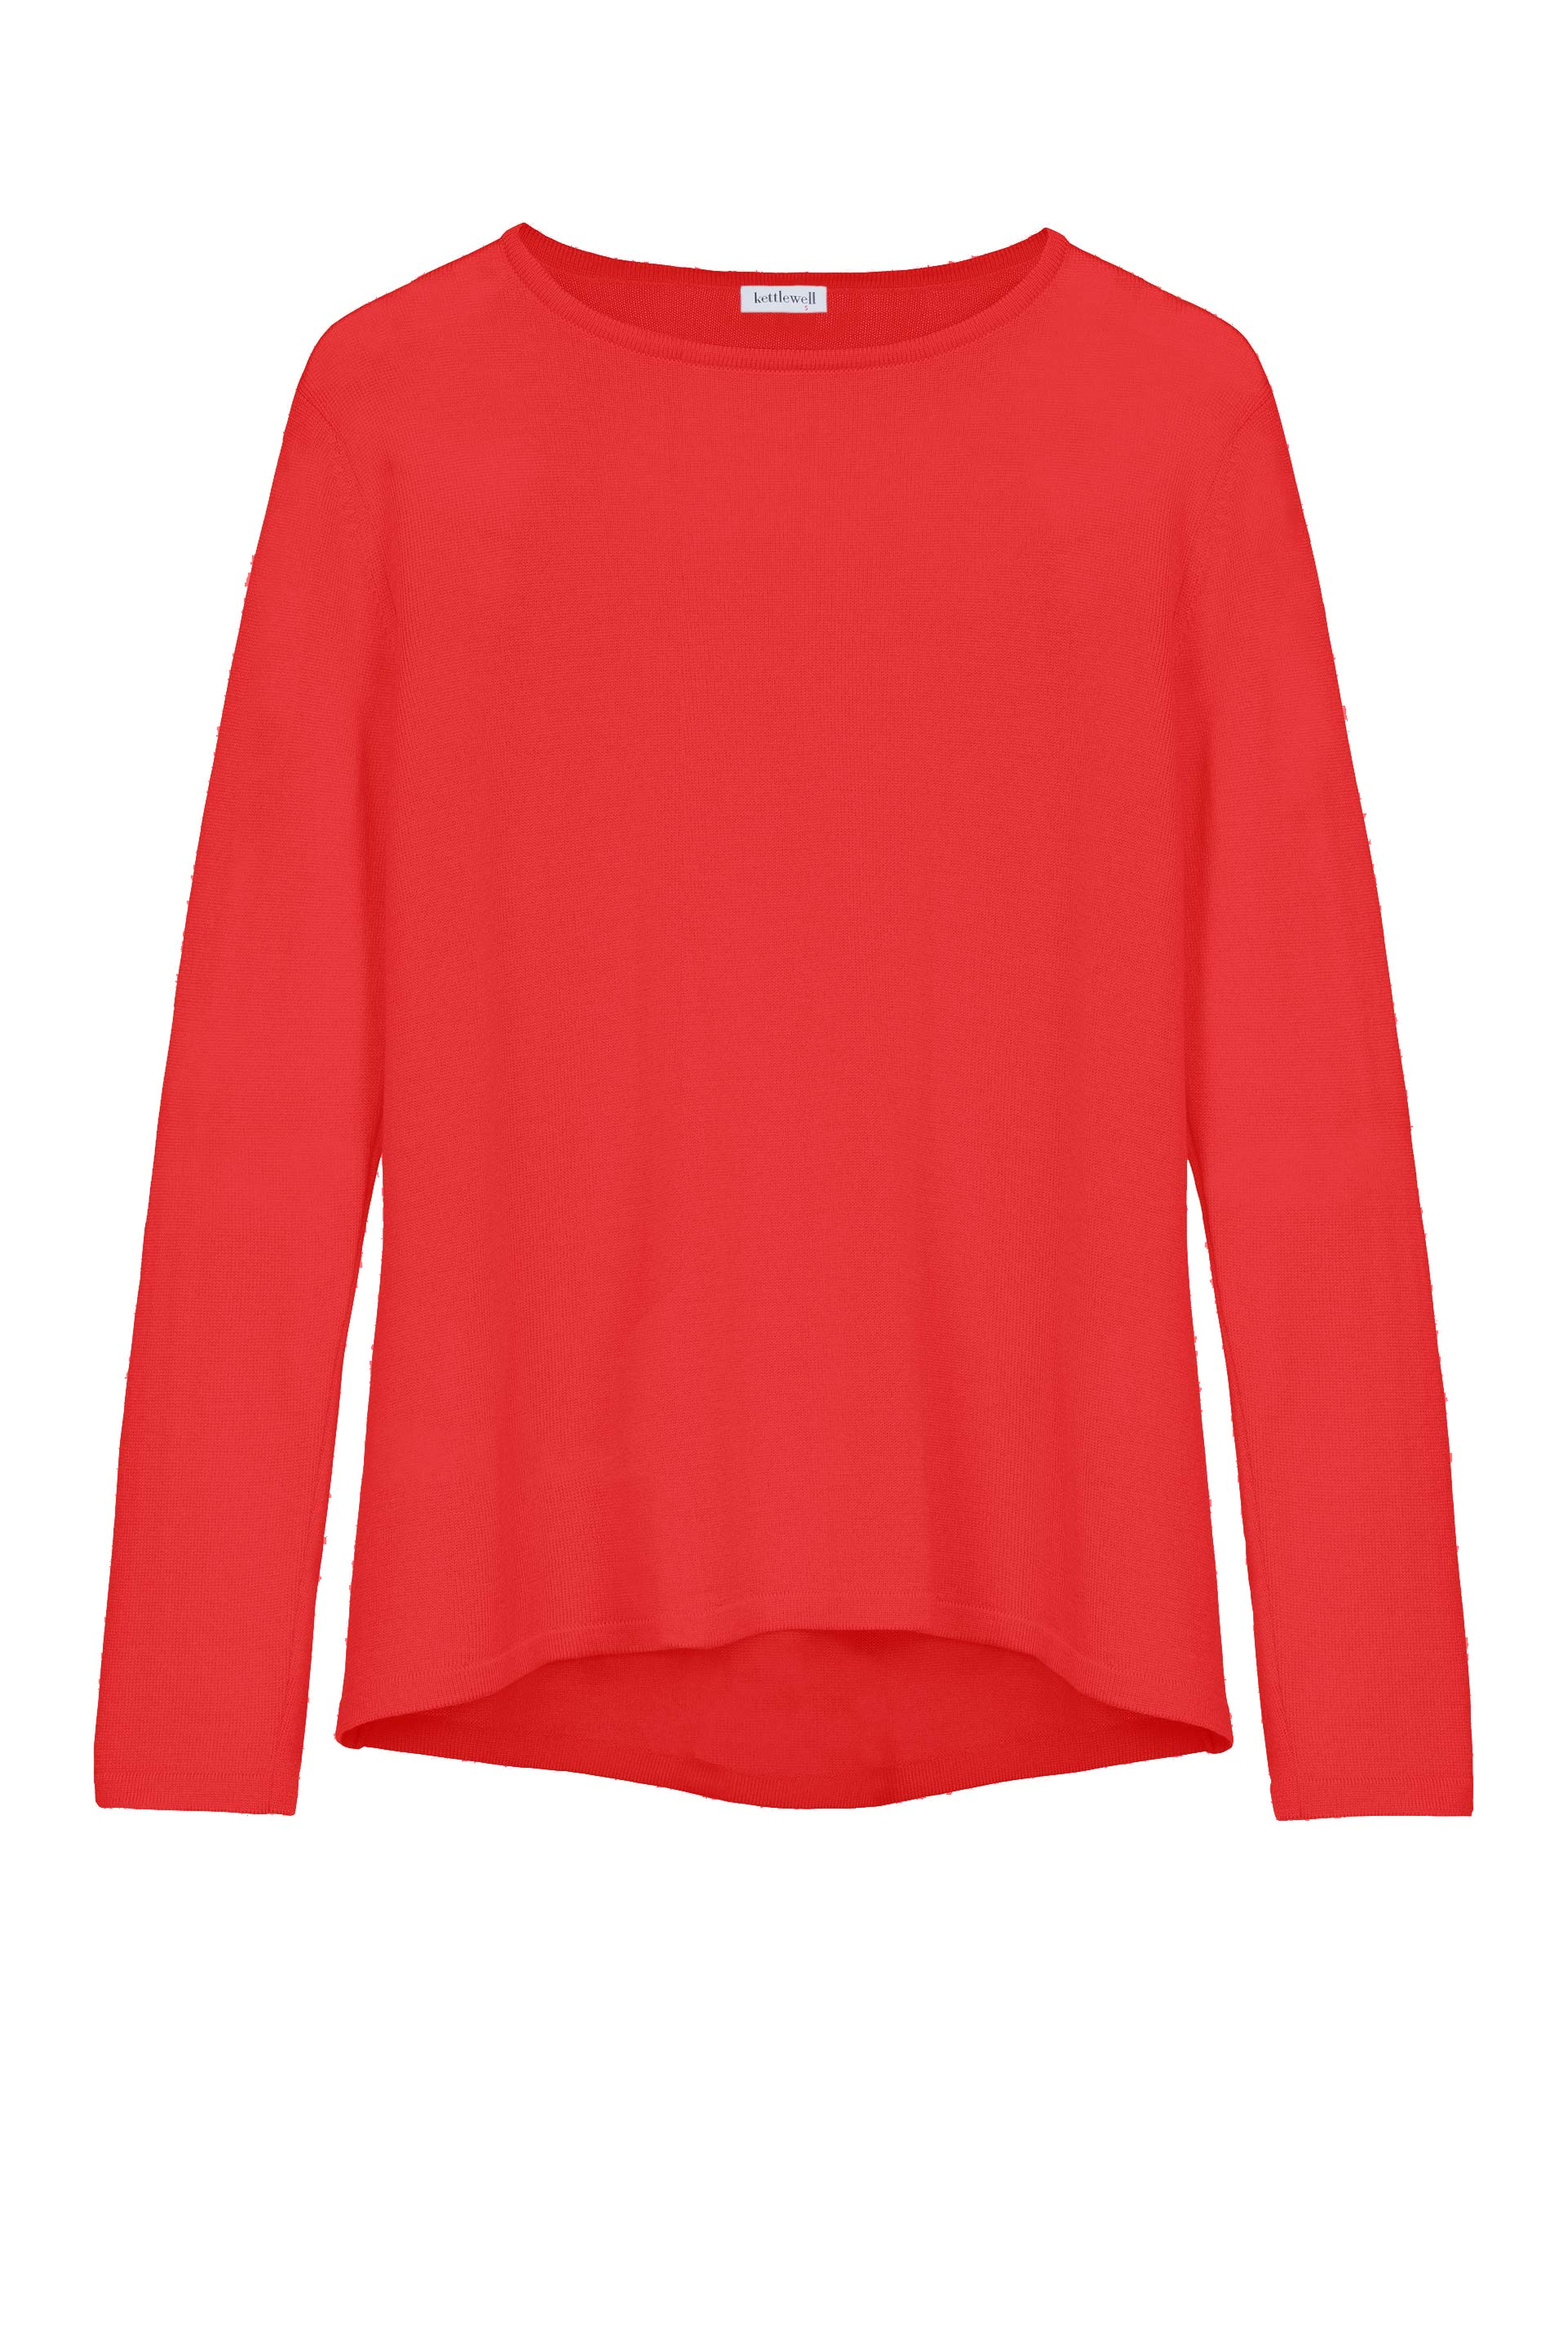 15483_mia_long_sweater_red_coral.jpg